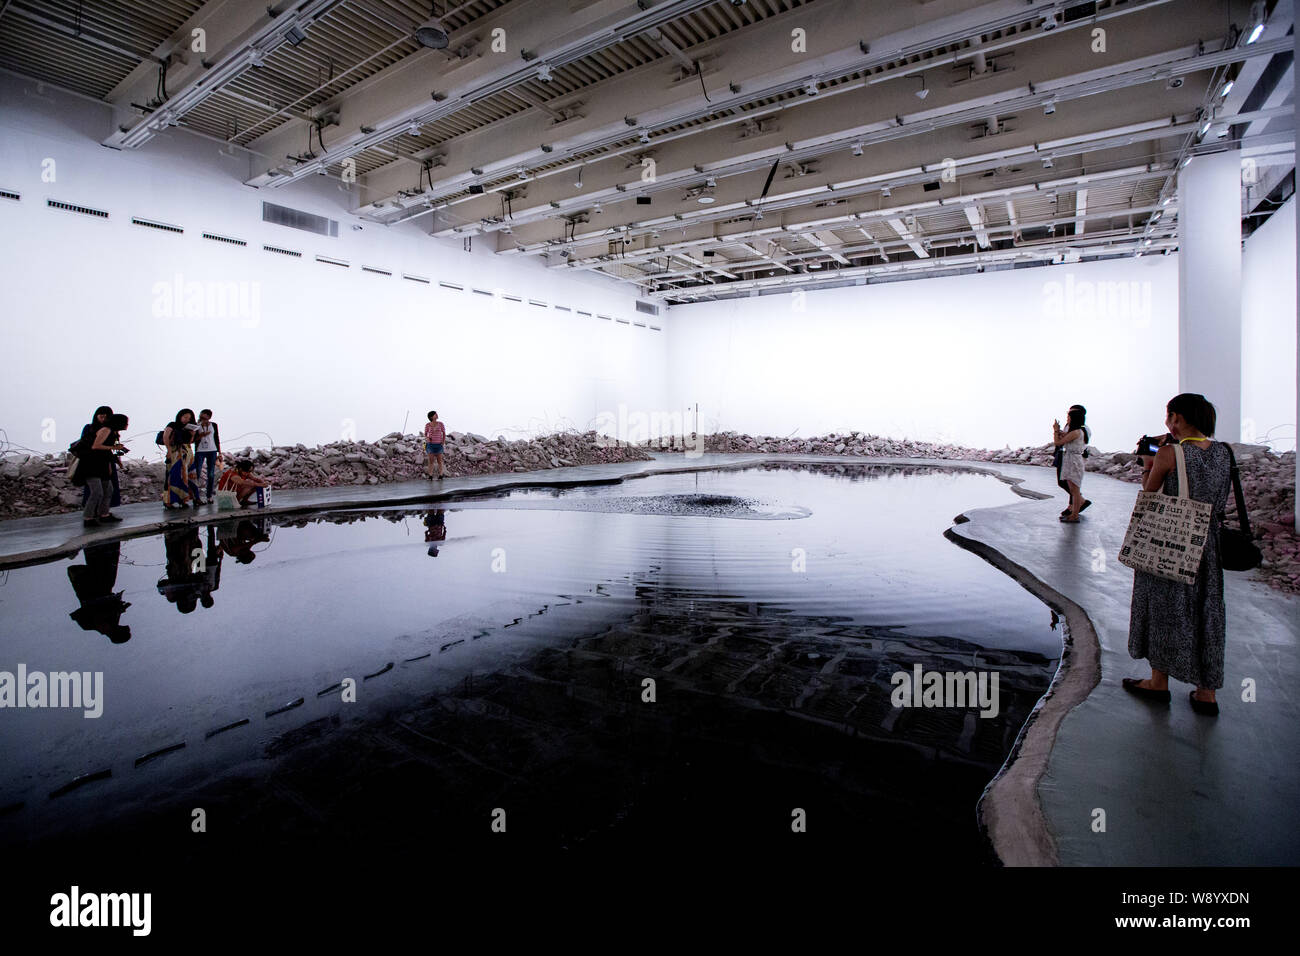 The artwork, Silent Ink, an installation of a 250 square meter lake excavated out of the gallery floor filled with 20,000 liters of black ink, by Chin Stock Photo